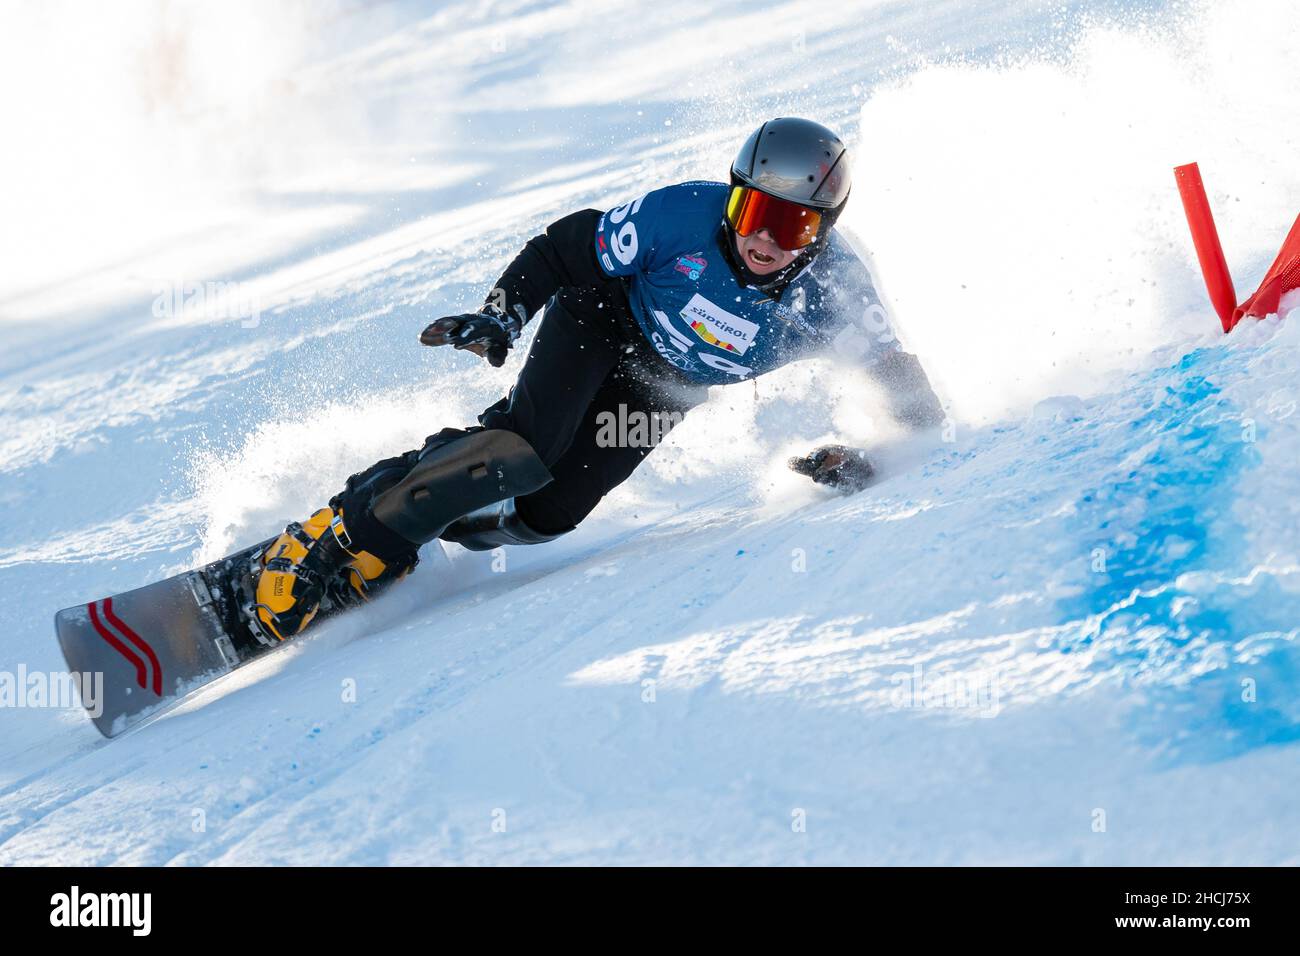 ANDERSON Jasey Jay (CAN) competing the Fis Snowboard World Cup 2022 Men's Parallel Giant Slalom on the Pra Di Tori (Carezza) Photo Alamy